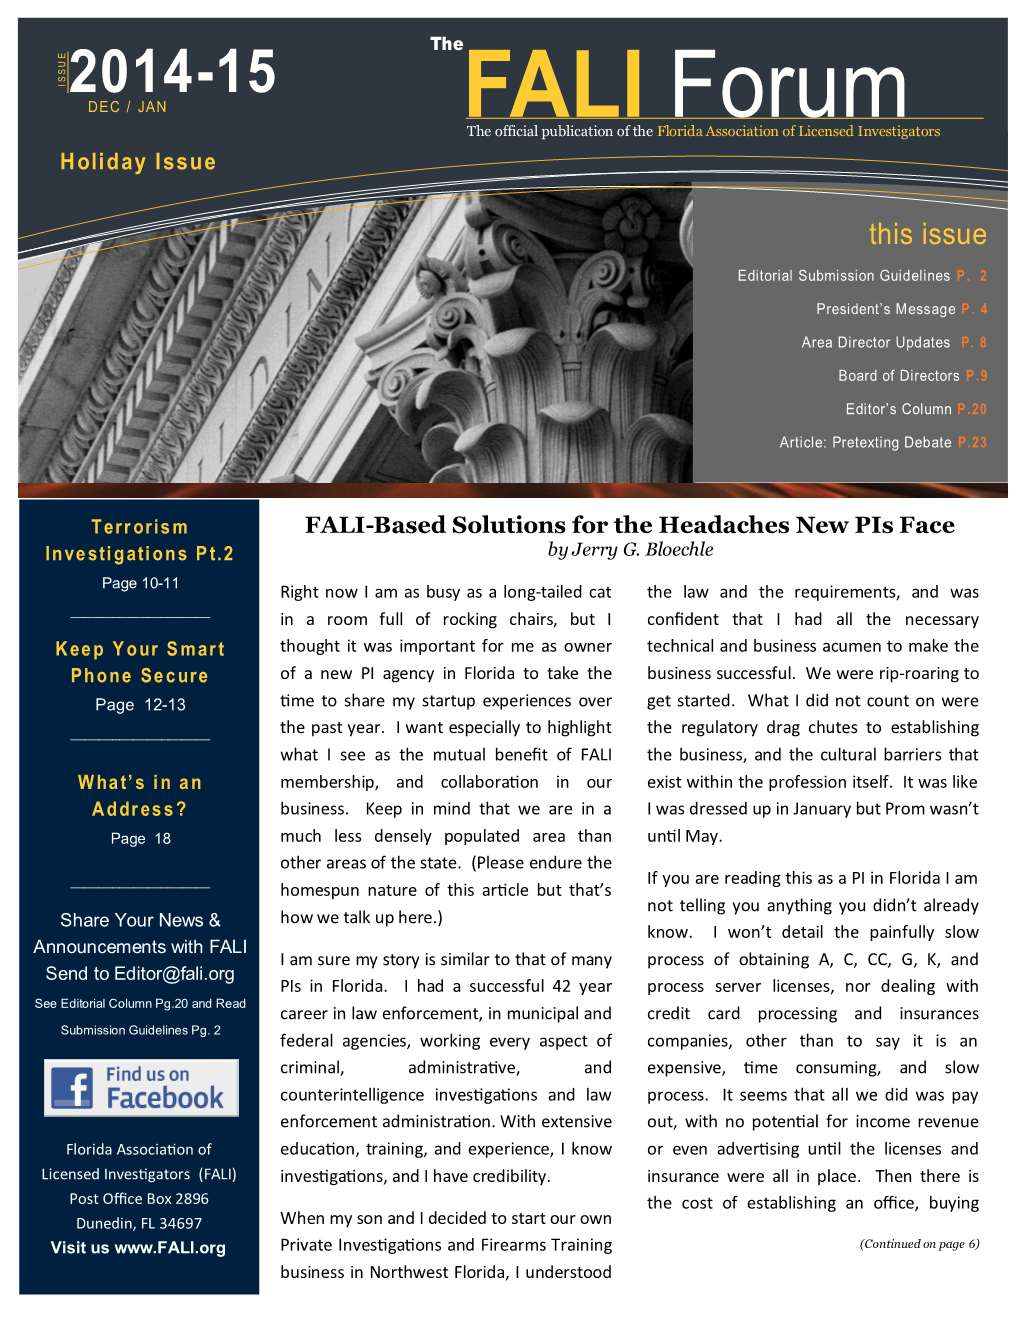 FALI Forum the Official Publication of the Florida Association of Licensed Investigators